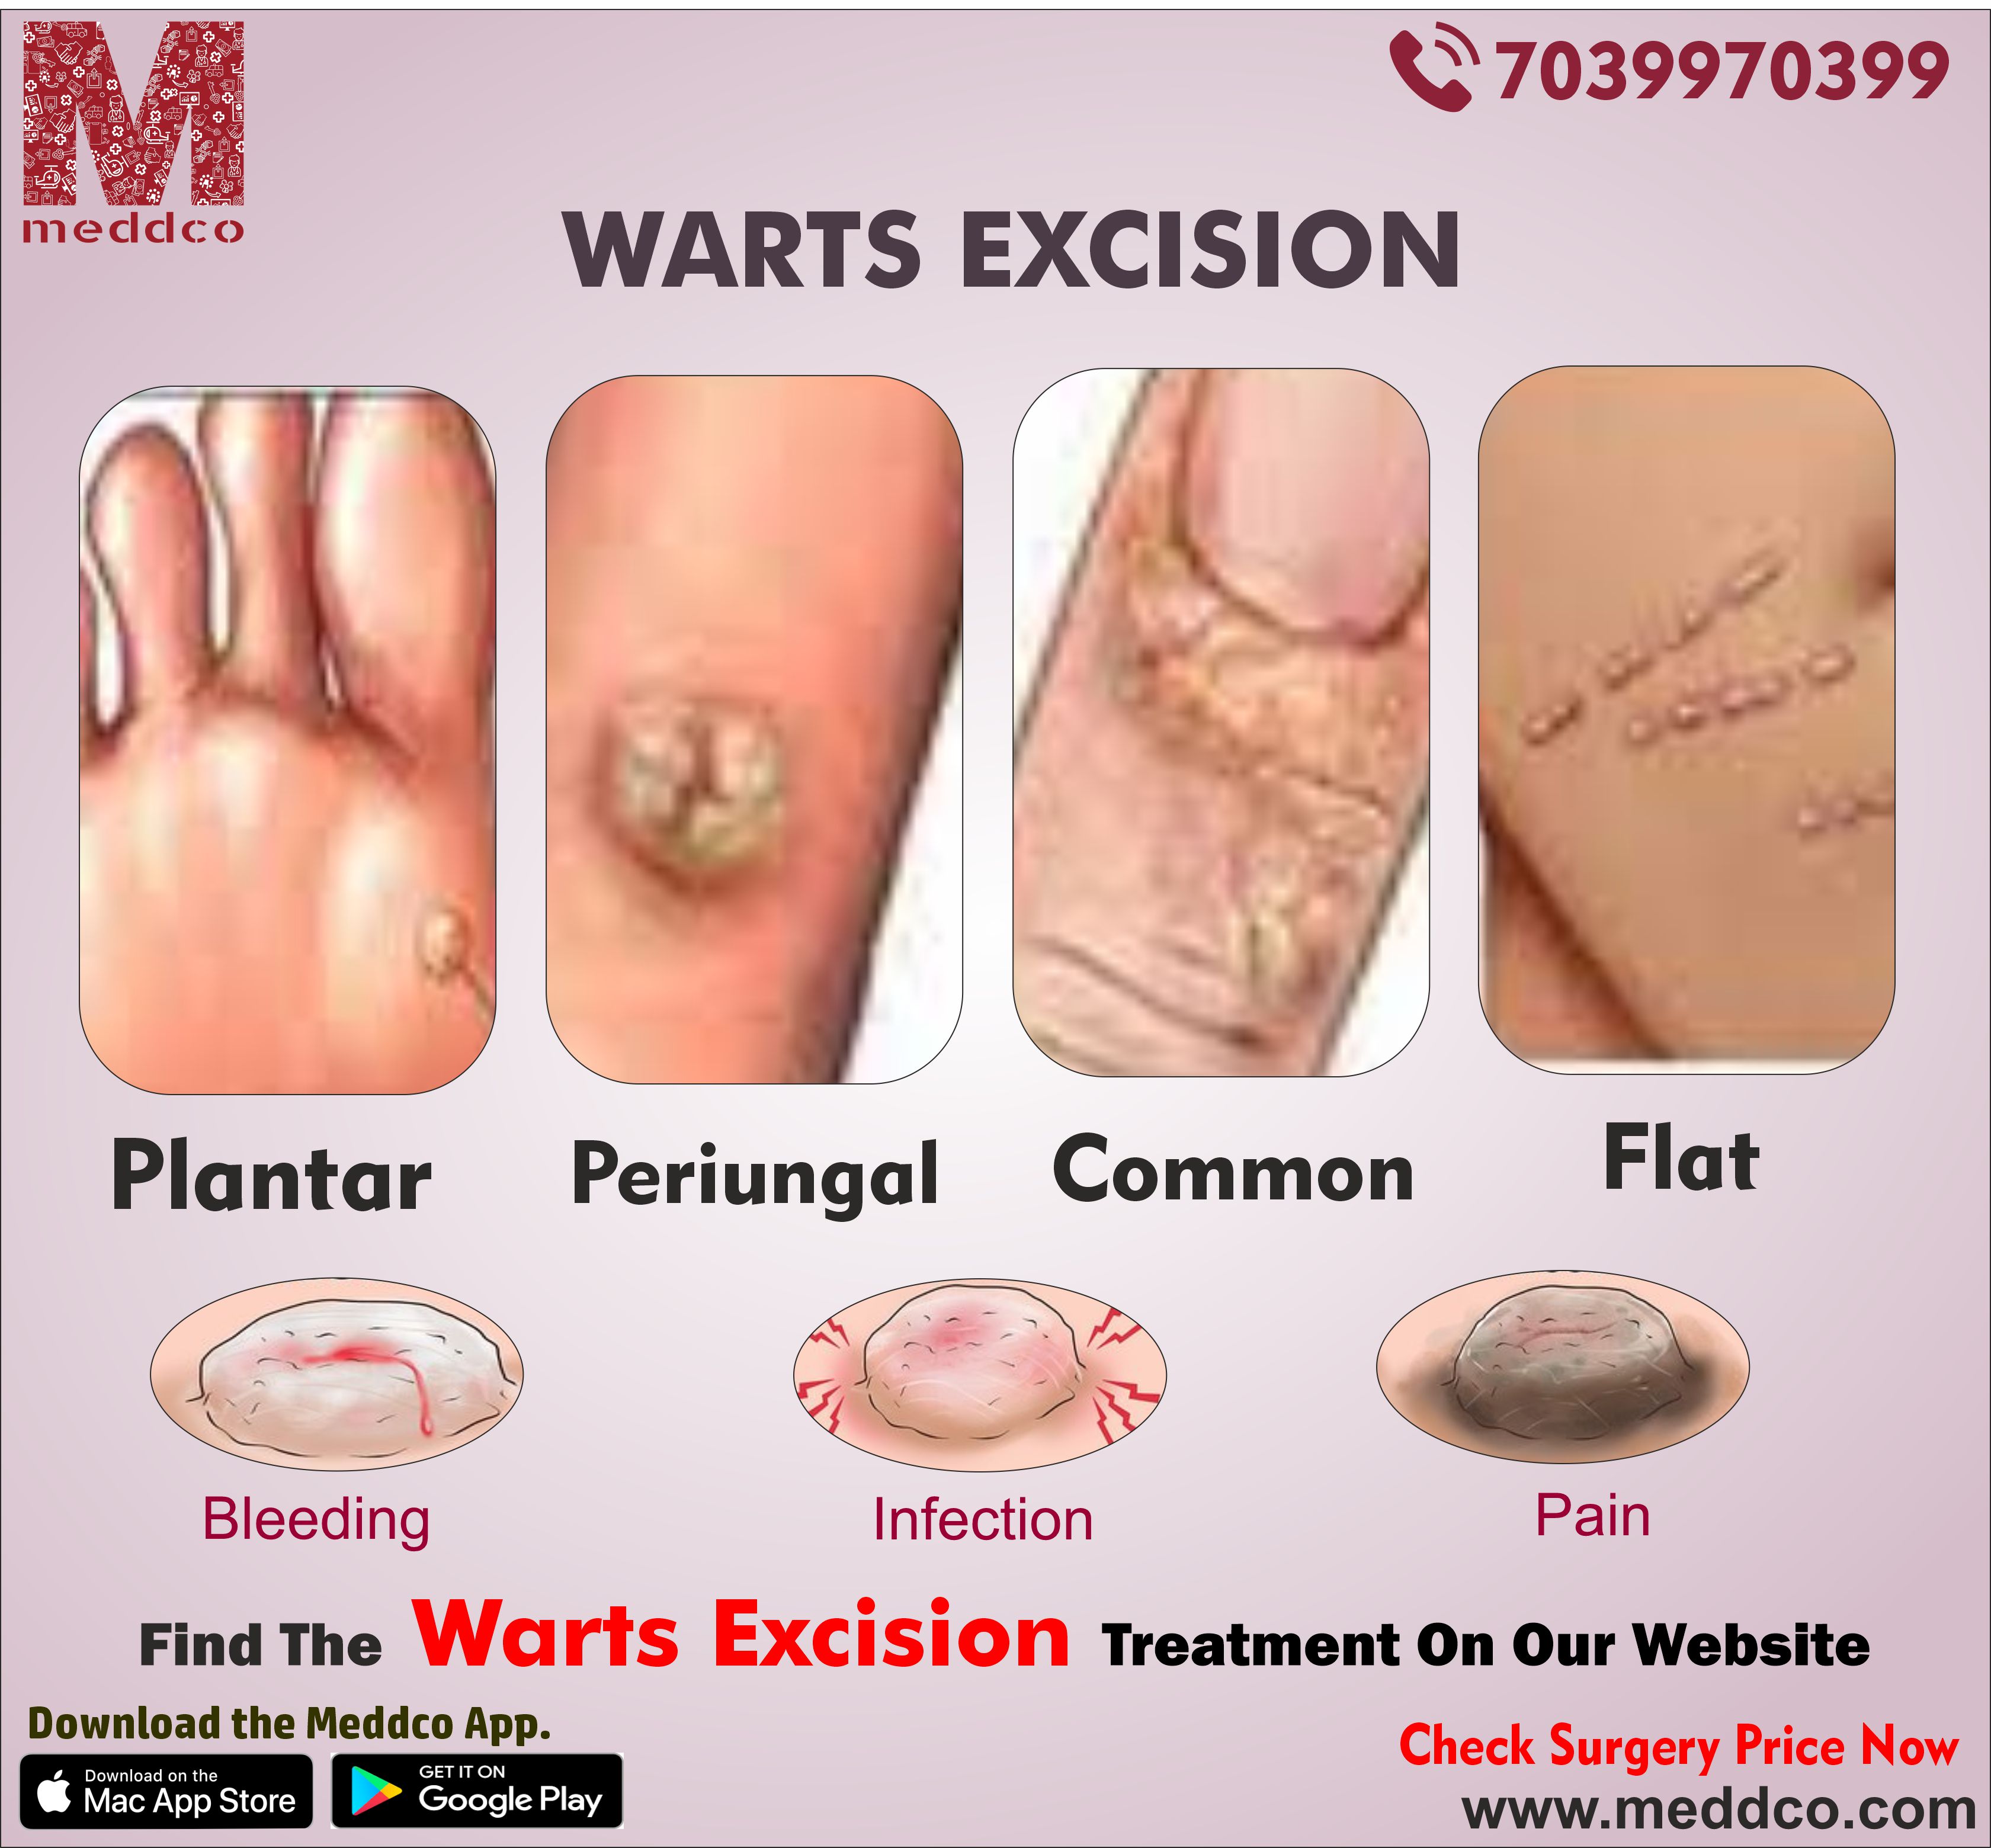 articles/WARTS_EXCISION.jpg